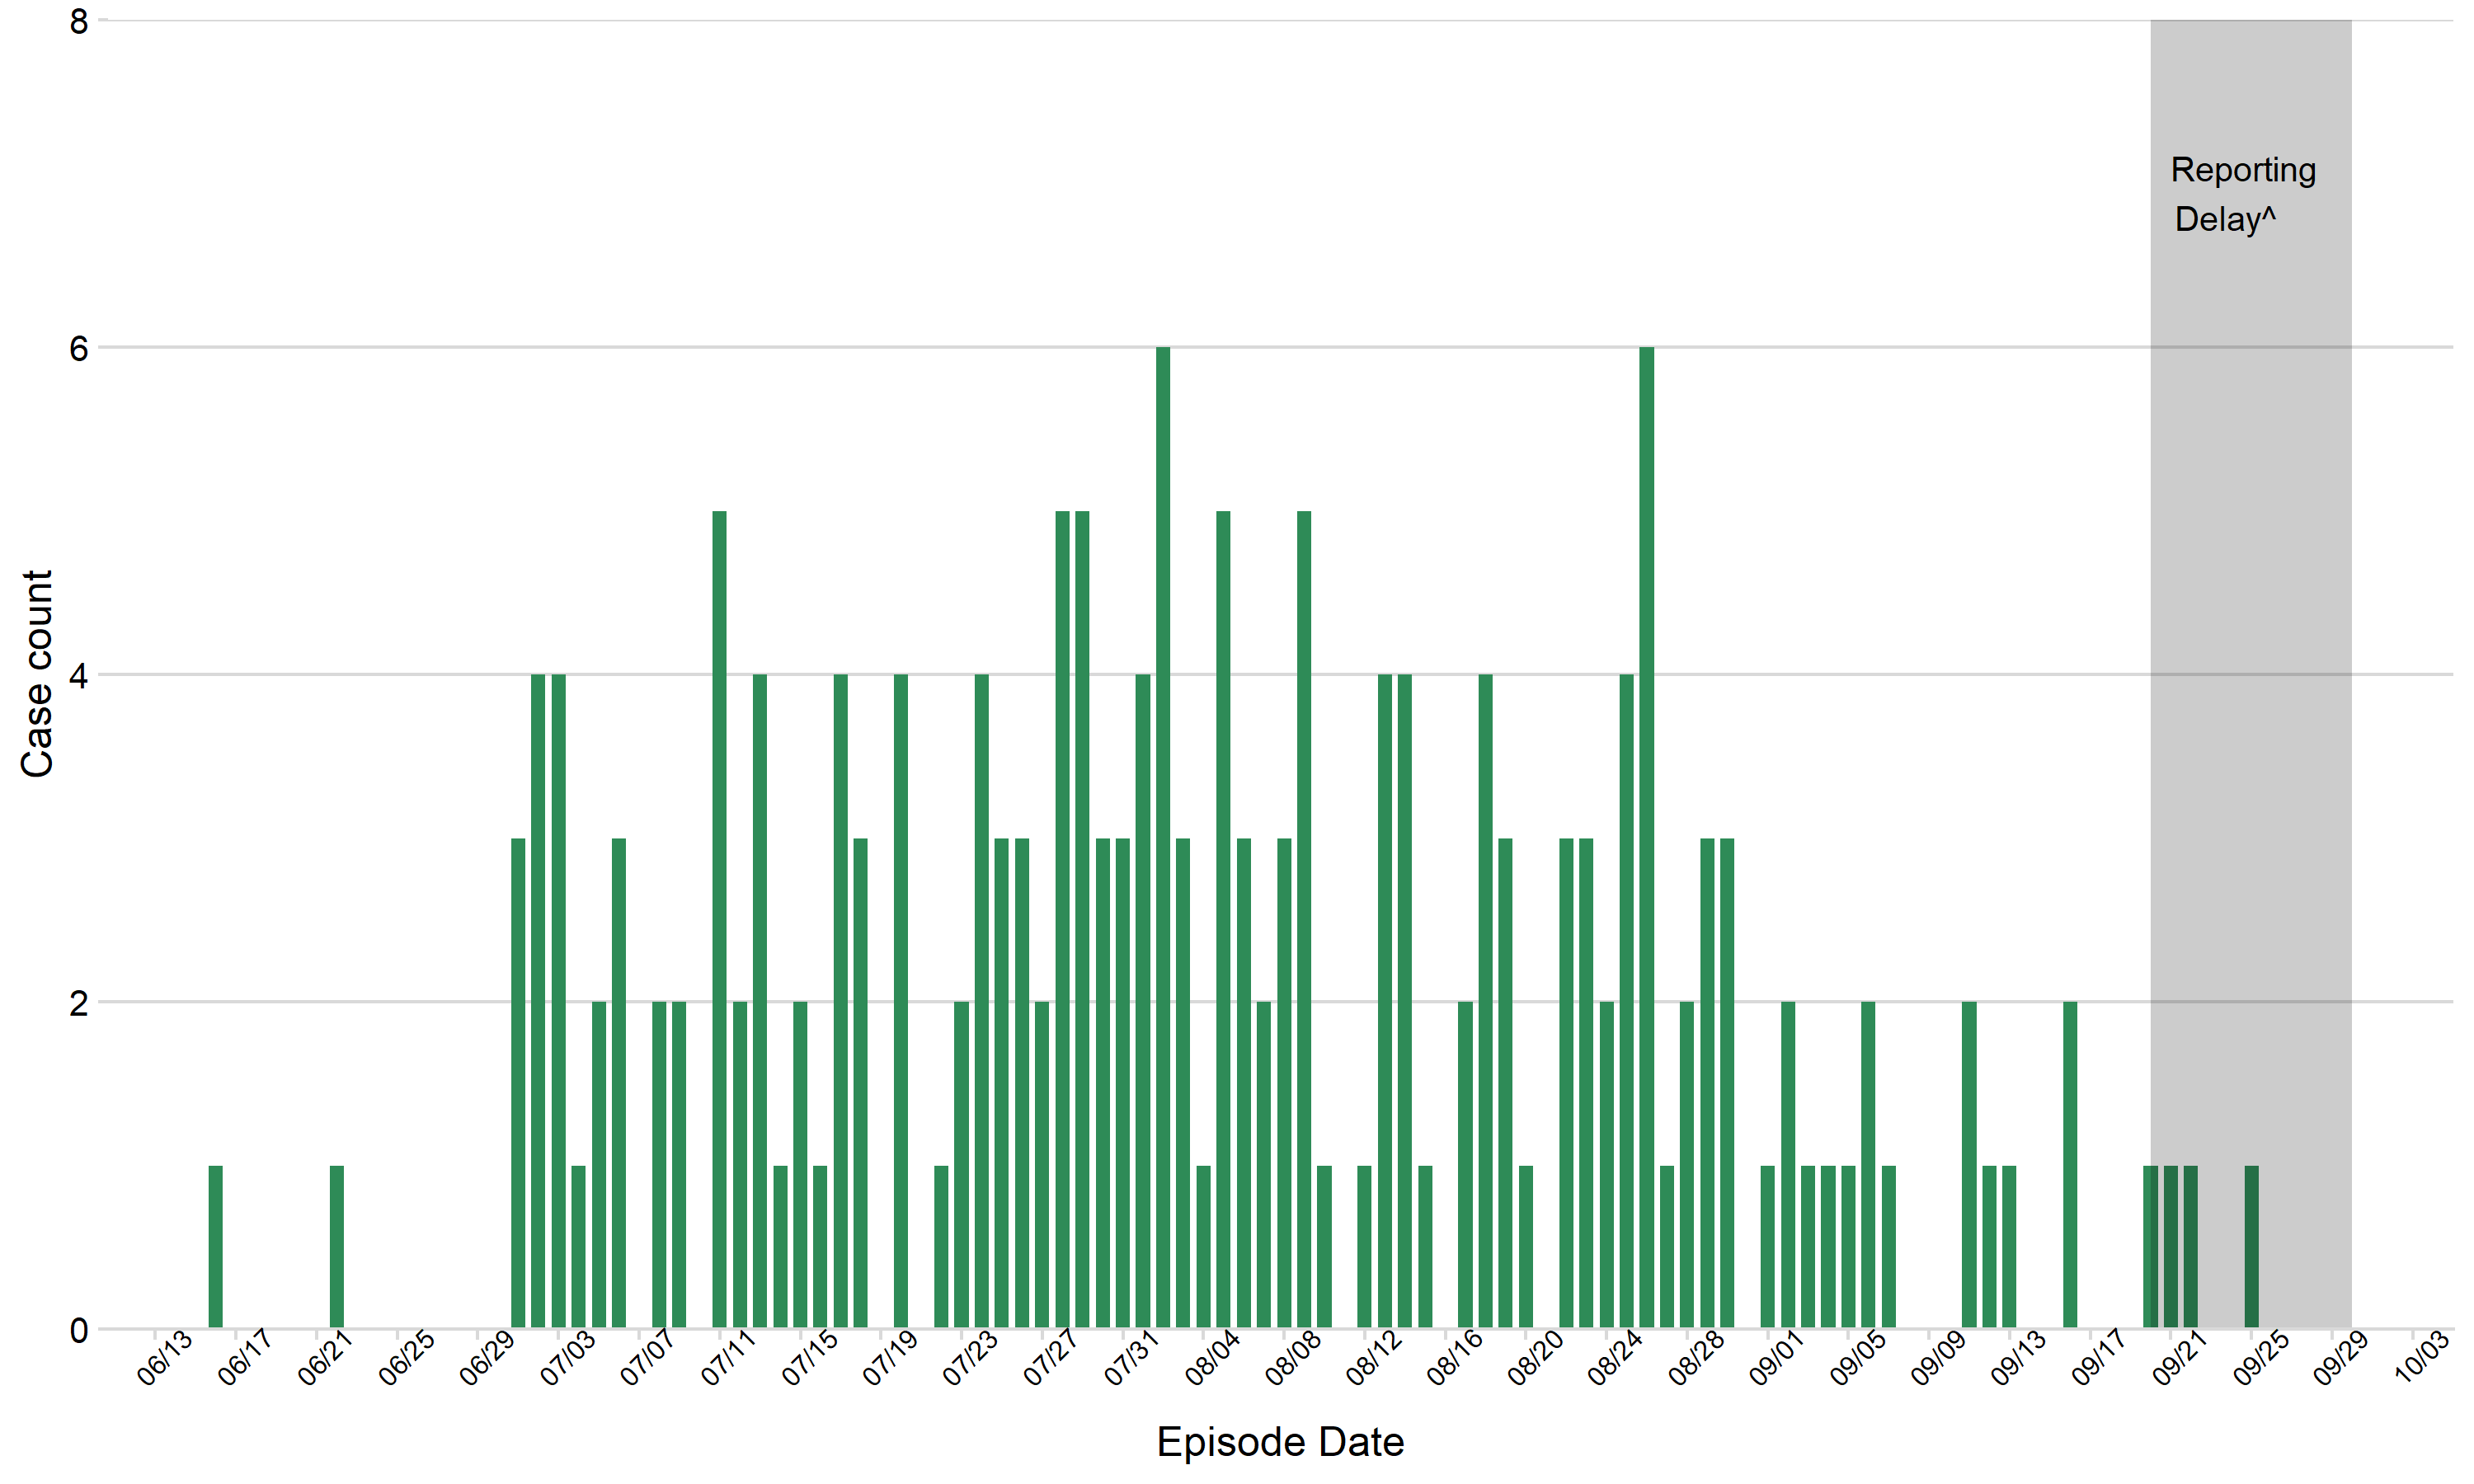 This bar graph shows the number of Santa Clara County MPX cases by episode date. Episode dates range from 6/16/22 to 9/25/22, with the highest number of cases (6) on 8/2/22 and 8/26/22. The number of cases remain relatively low, though there is an expected delay in case reporting for the past 10 days.